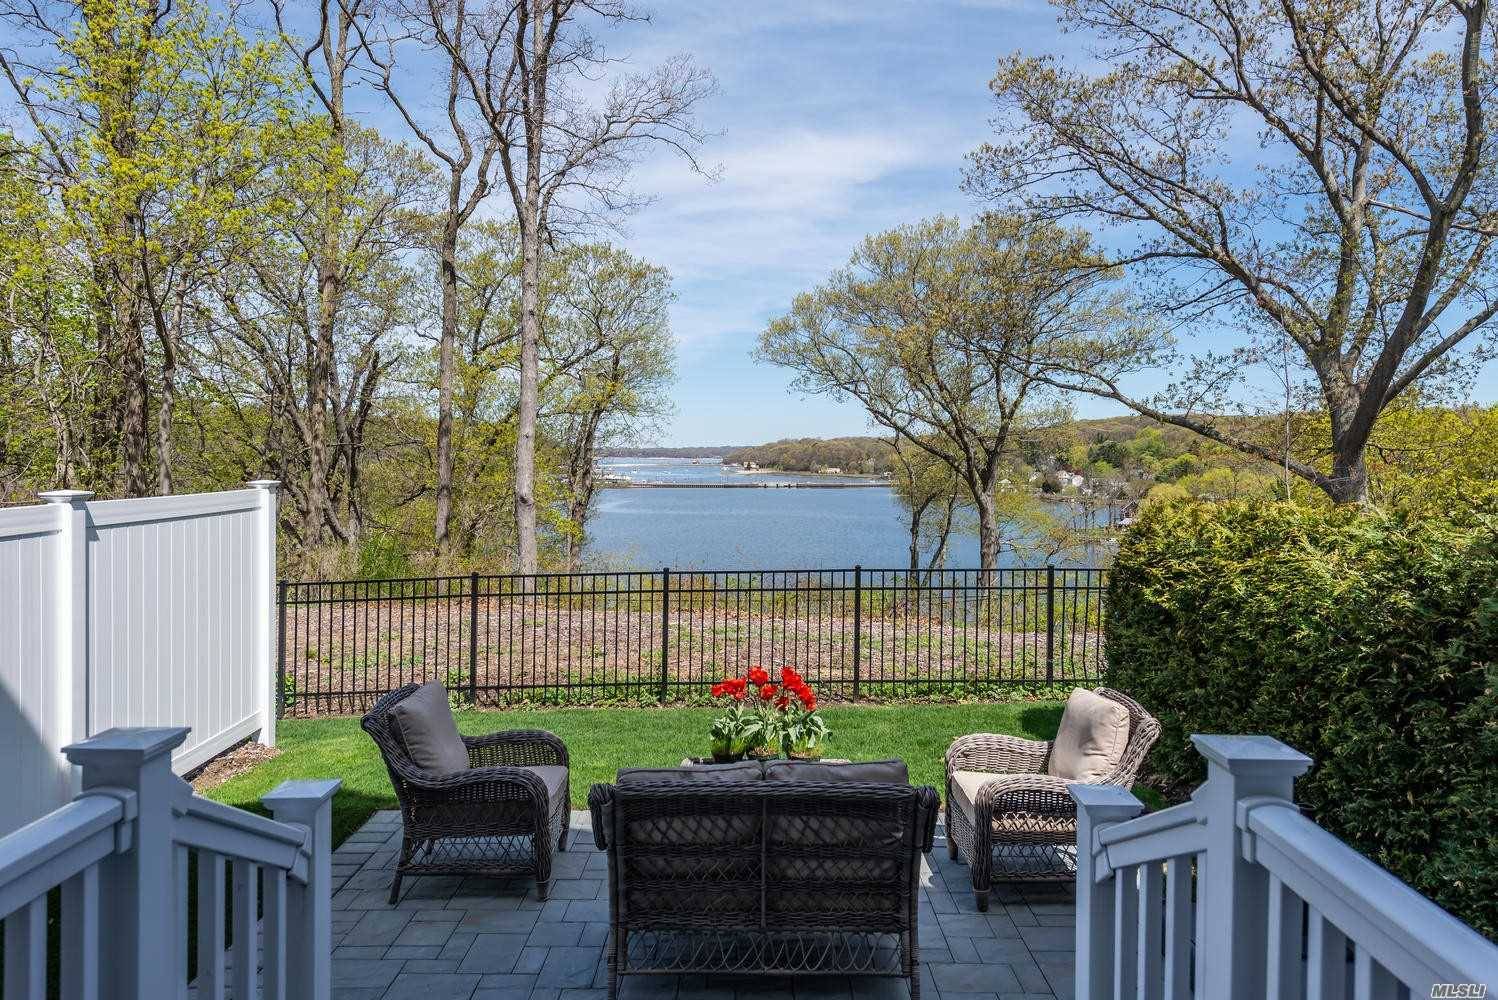 Open the door to Paradise in the barely two year old townhome overlooking Centerport Harbor.